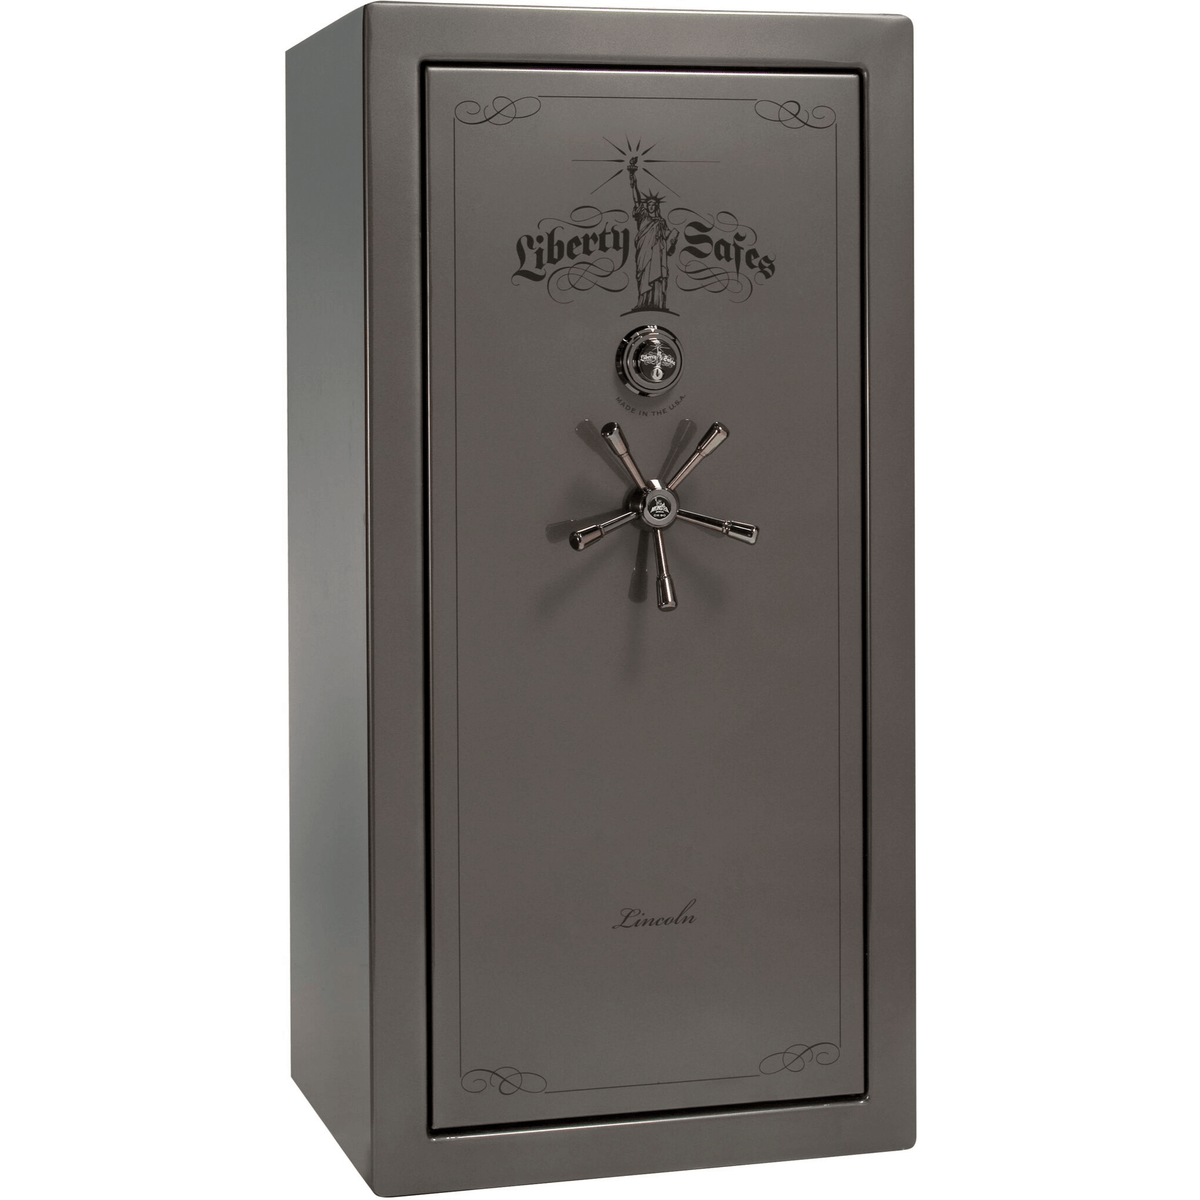 Liberty Lincoln 25 Safe in Gray Gloss with Black Chrome Mechanical Lock.